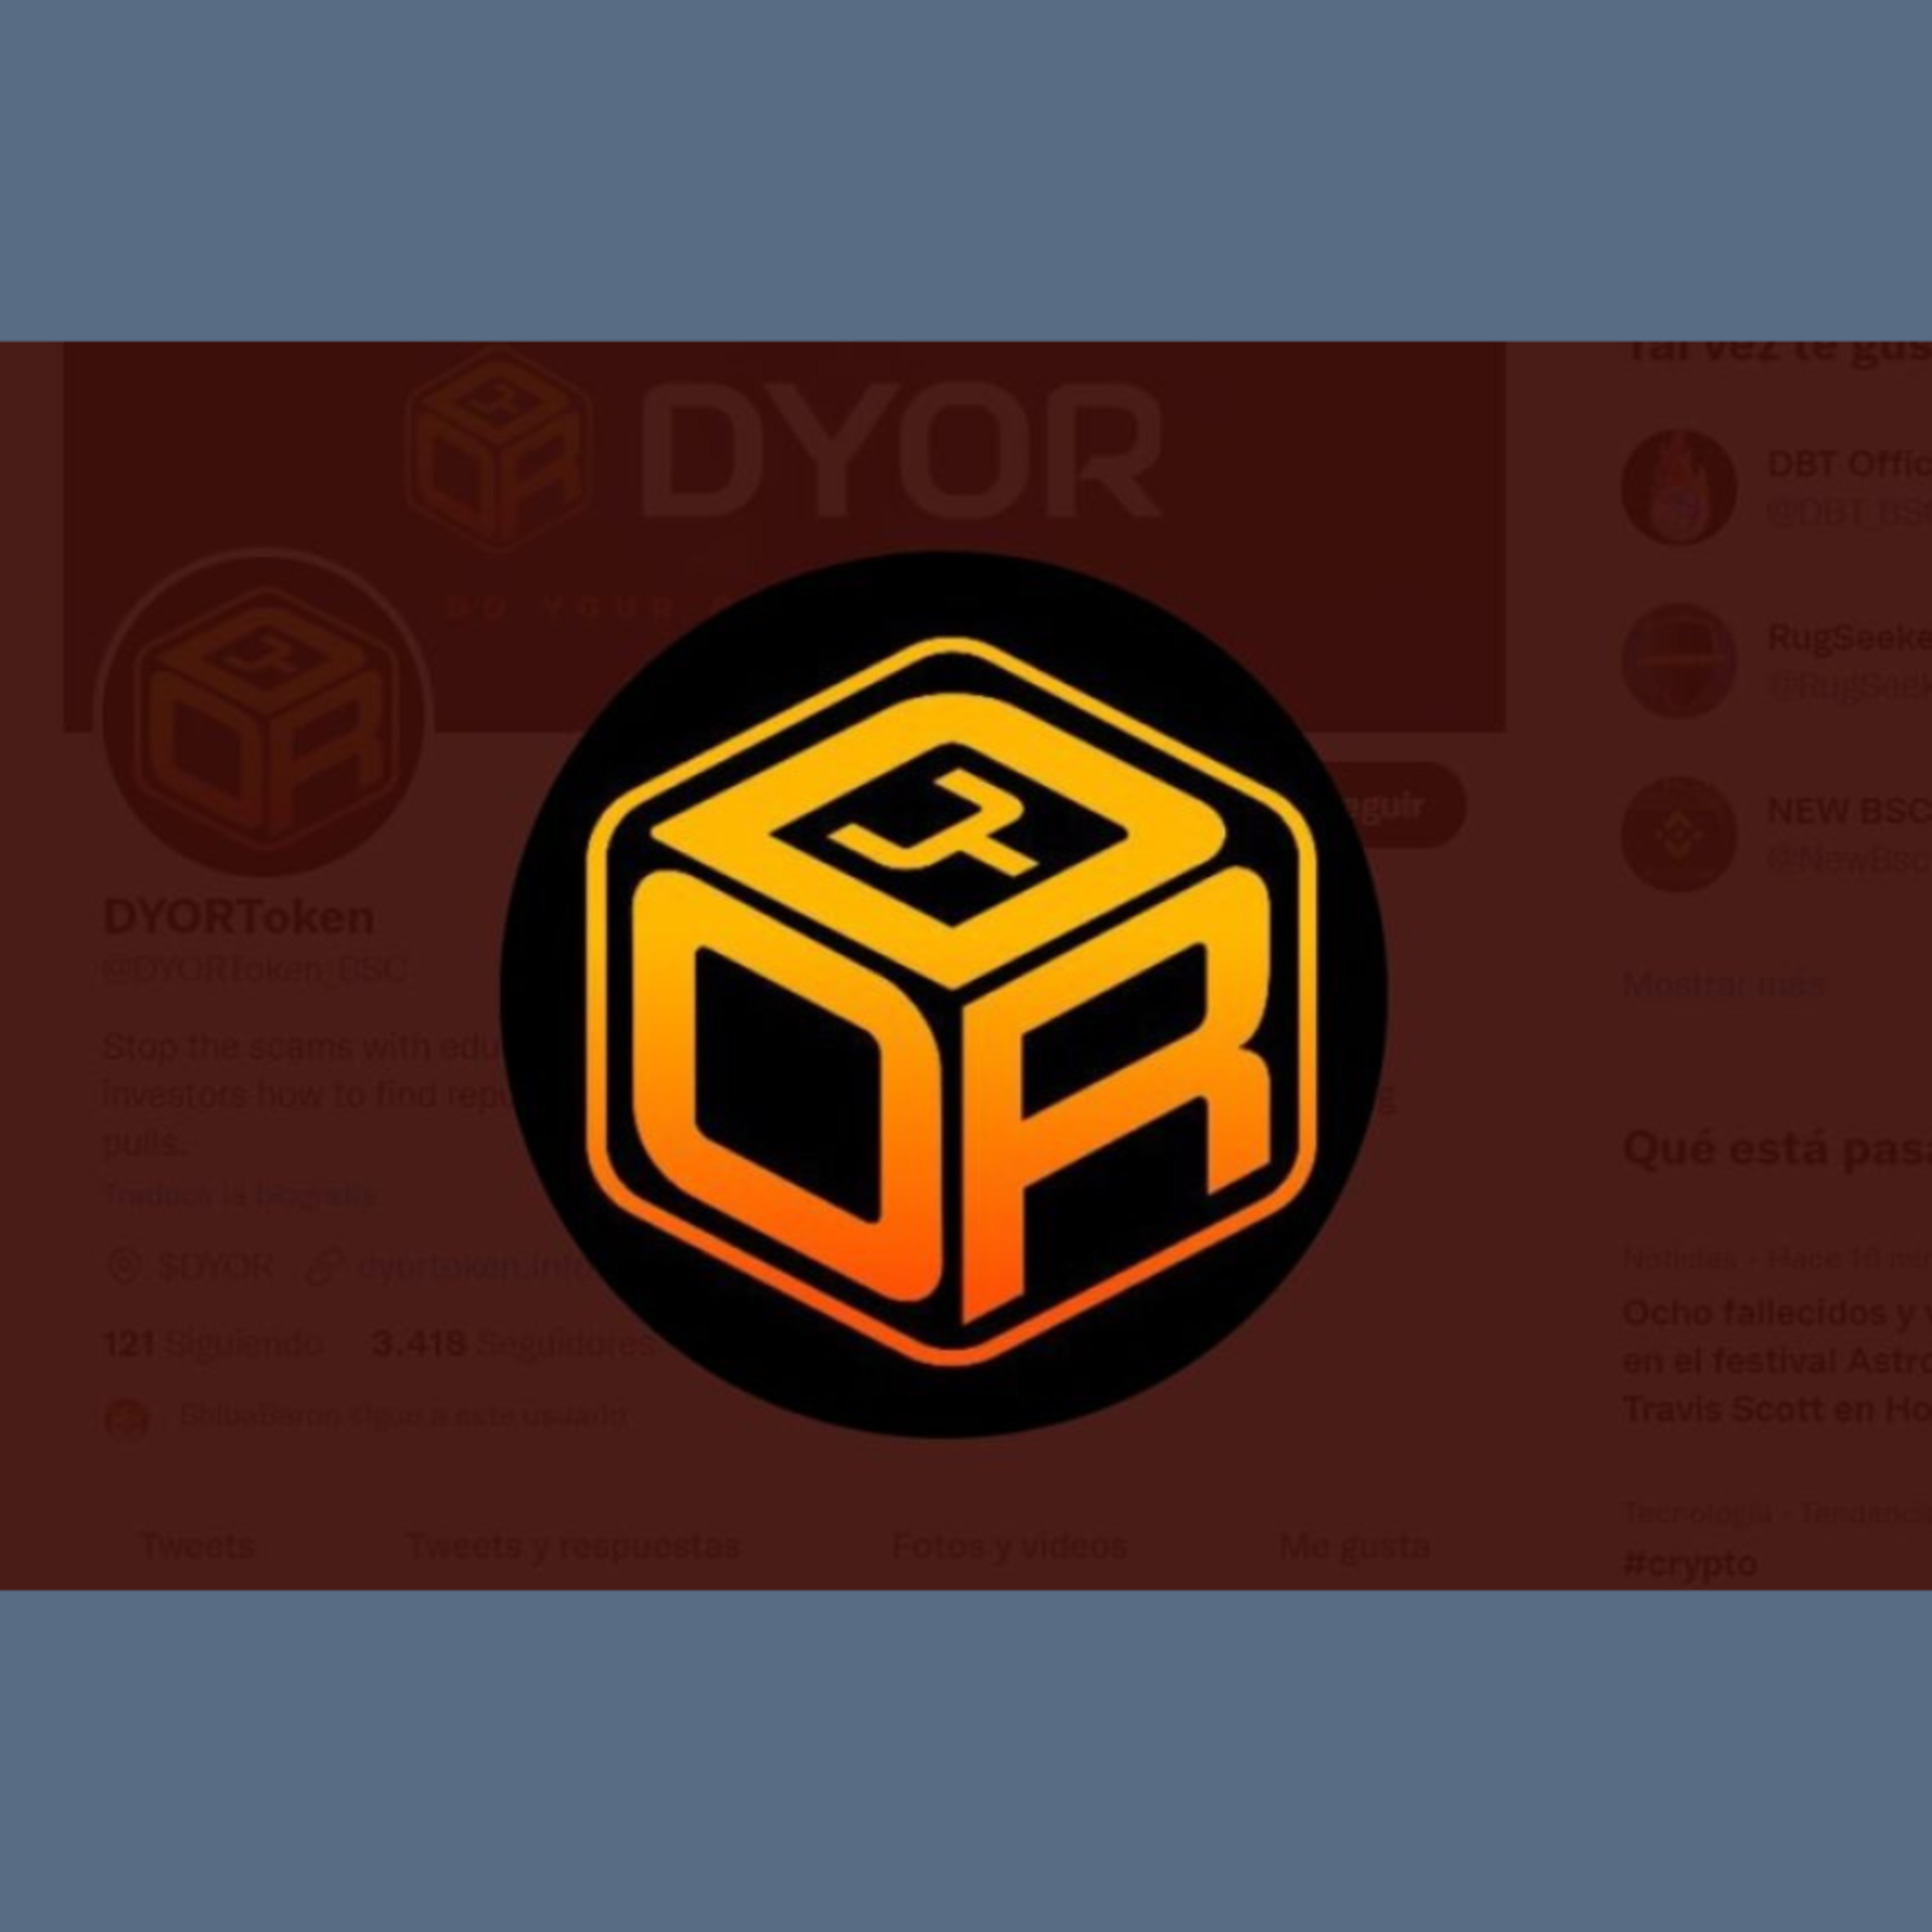 We Were Shocked At Tether Gold, Plus We Welcome Striking From DYOR Token To Discuss The Project